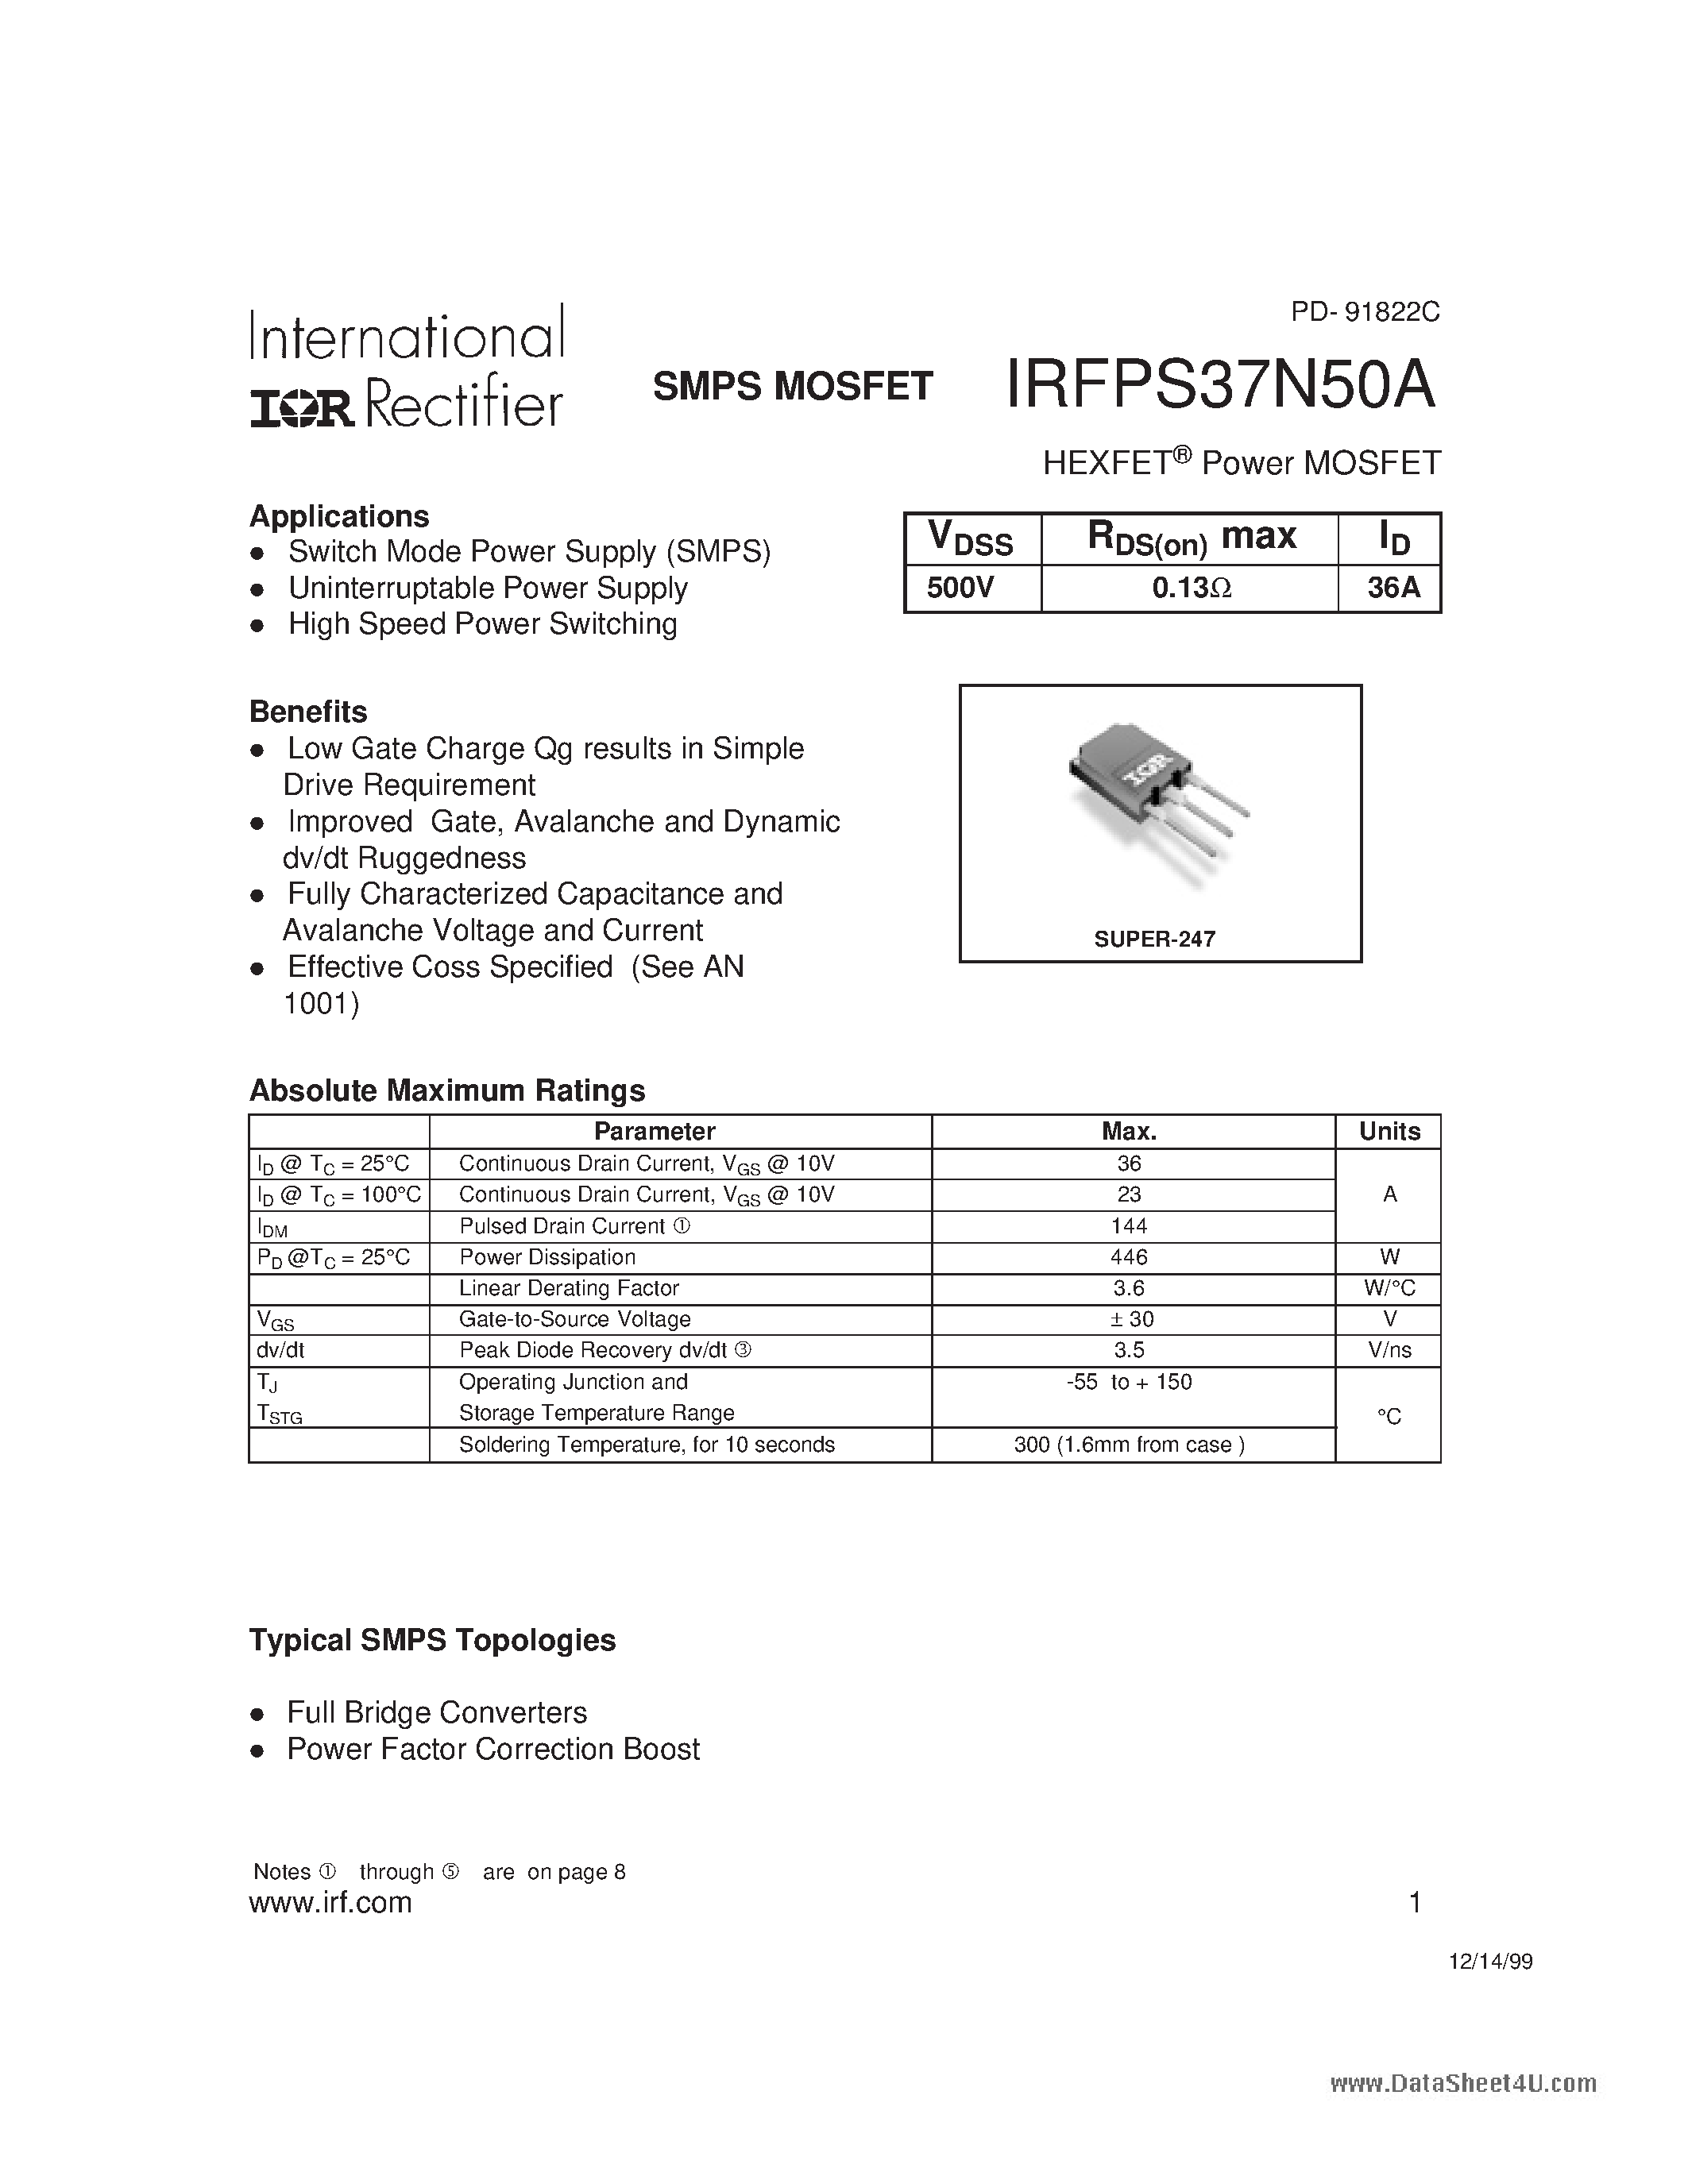 Даташит IRFPS37N50A - HEXFET Power MOSFET страница 1